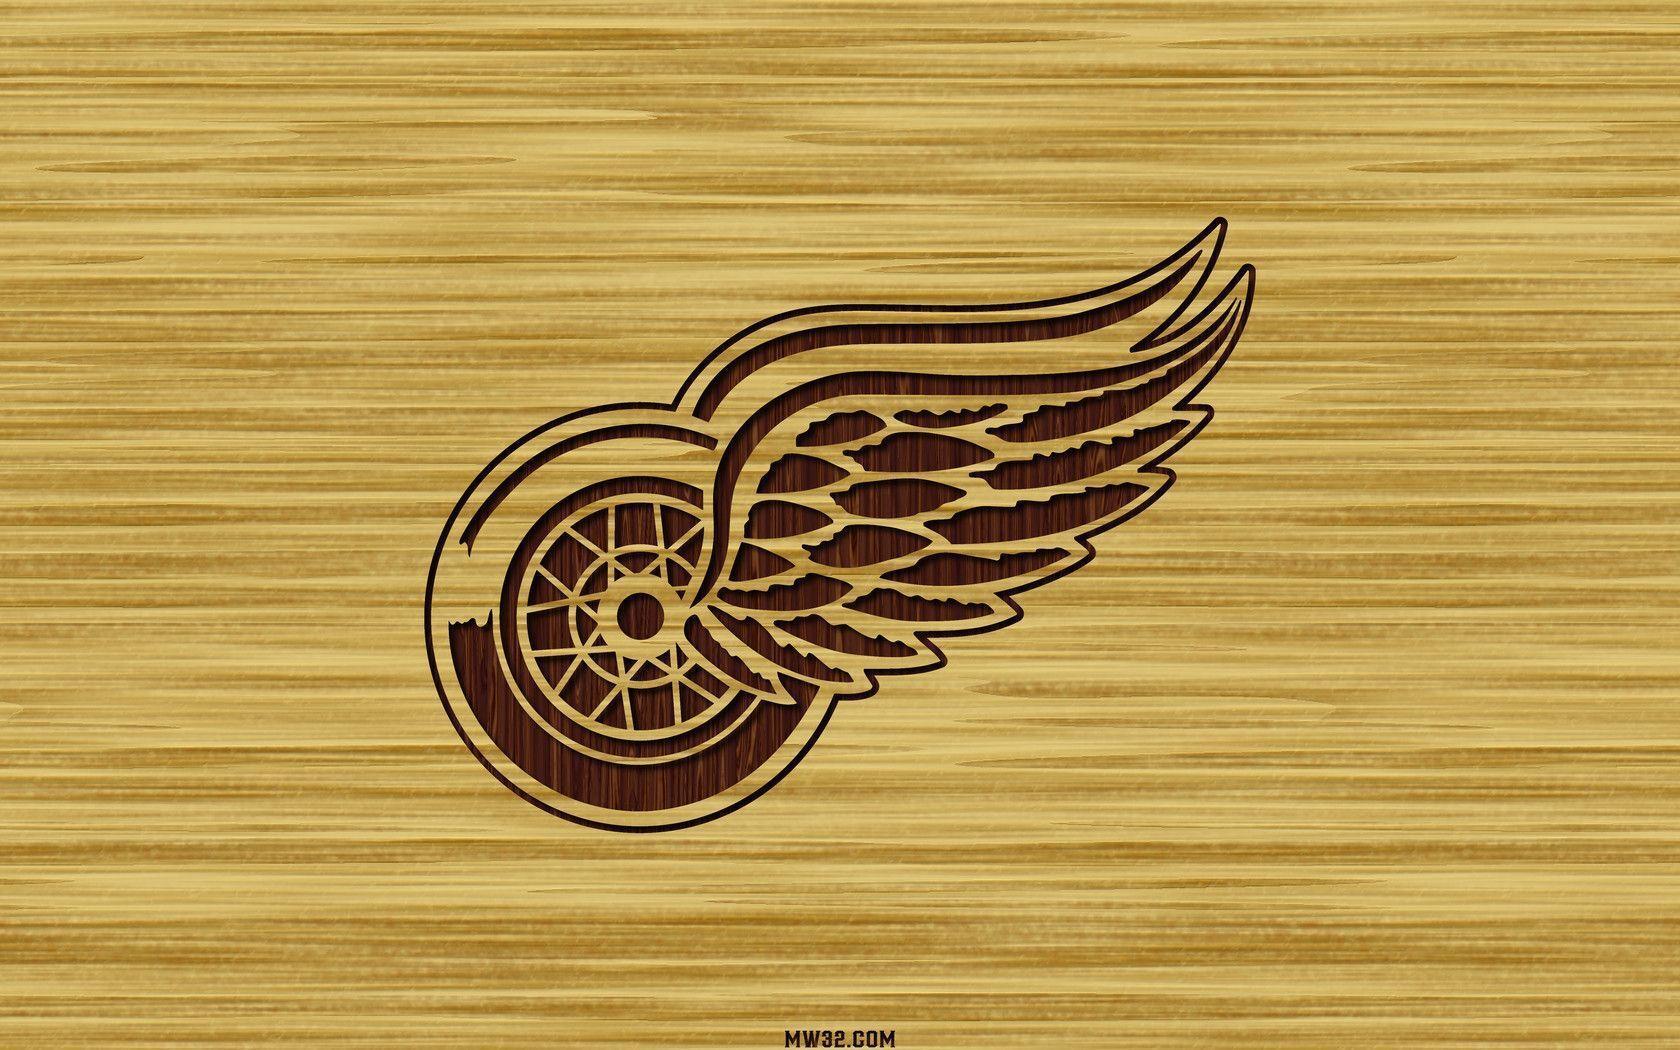 Detroit Red Wings Phone Wallpaper 62503 Background. fullhdimage